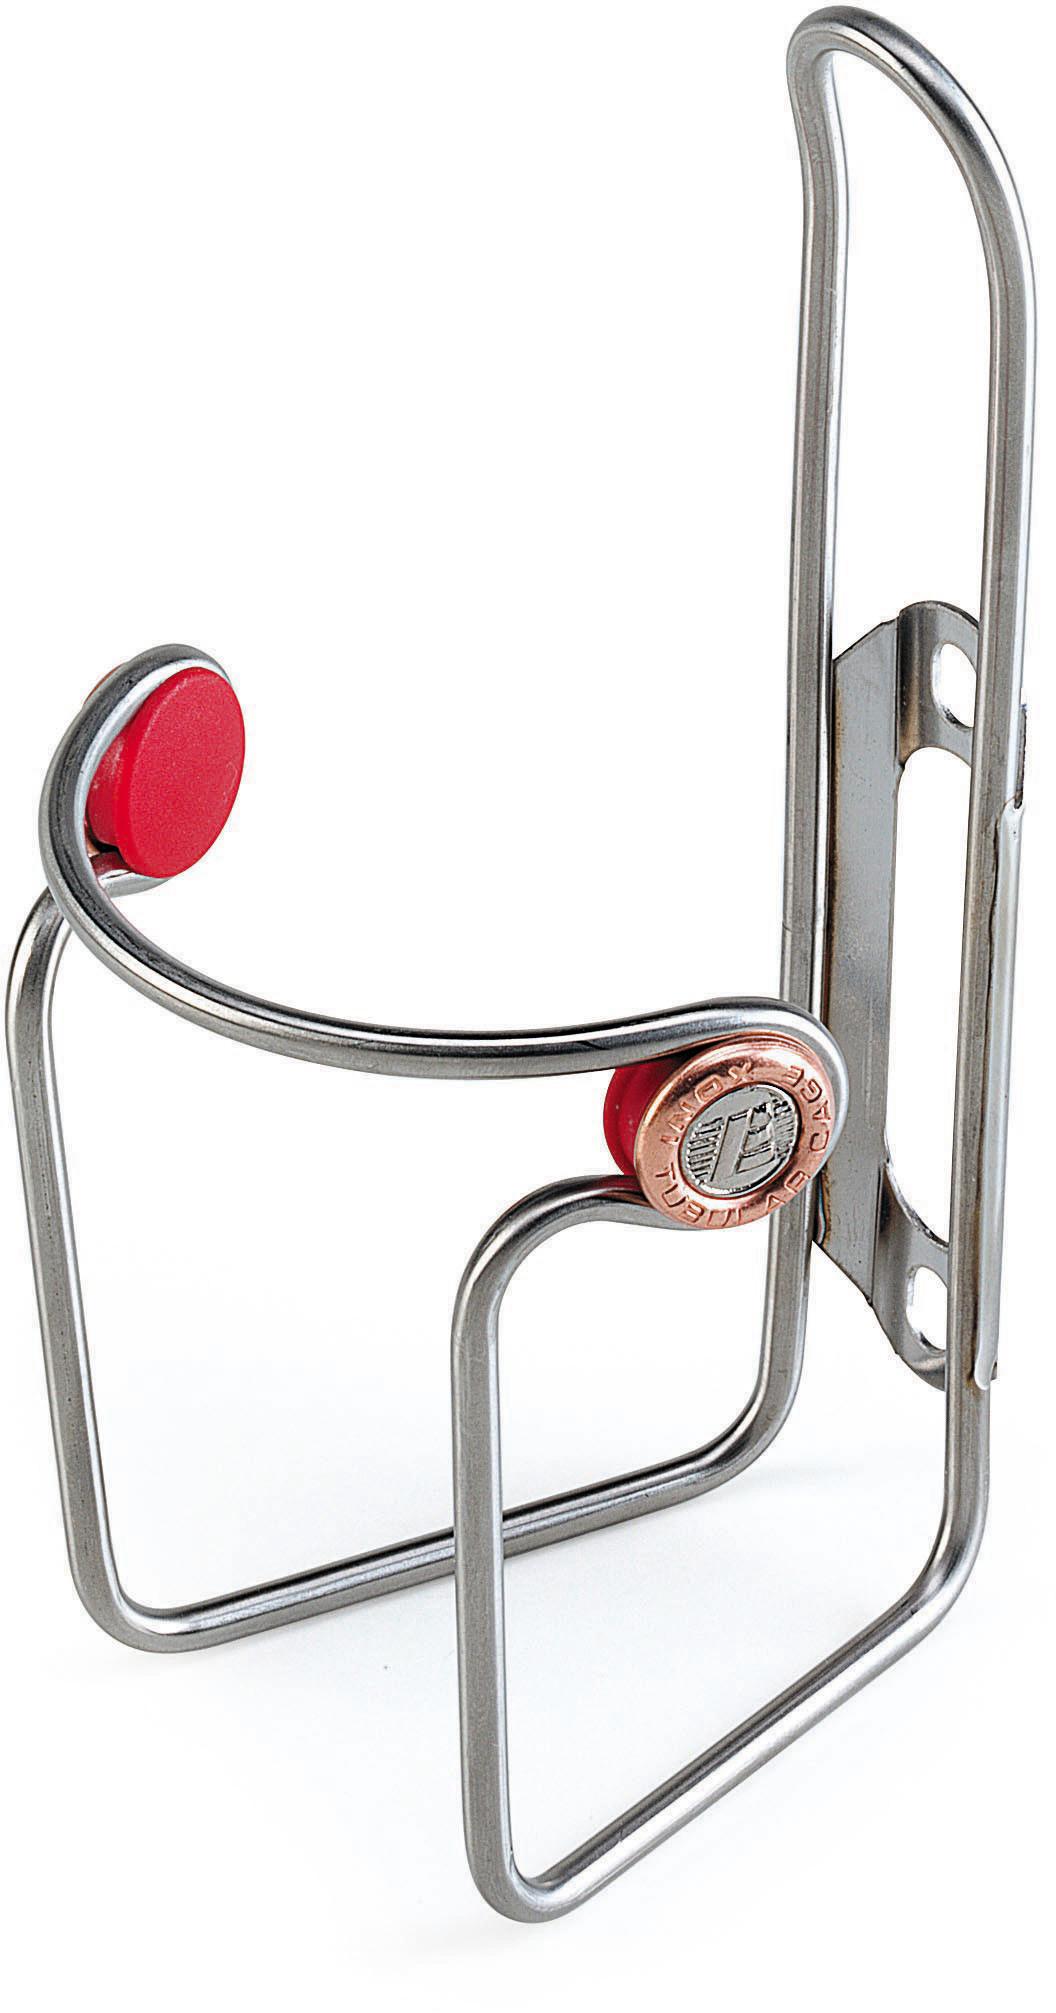 Ciussi Inox Bottle Cage - Tubular Stainless Steel